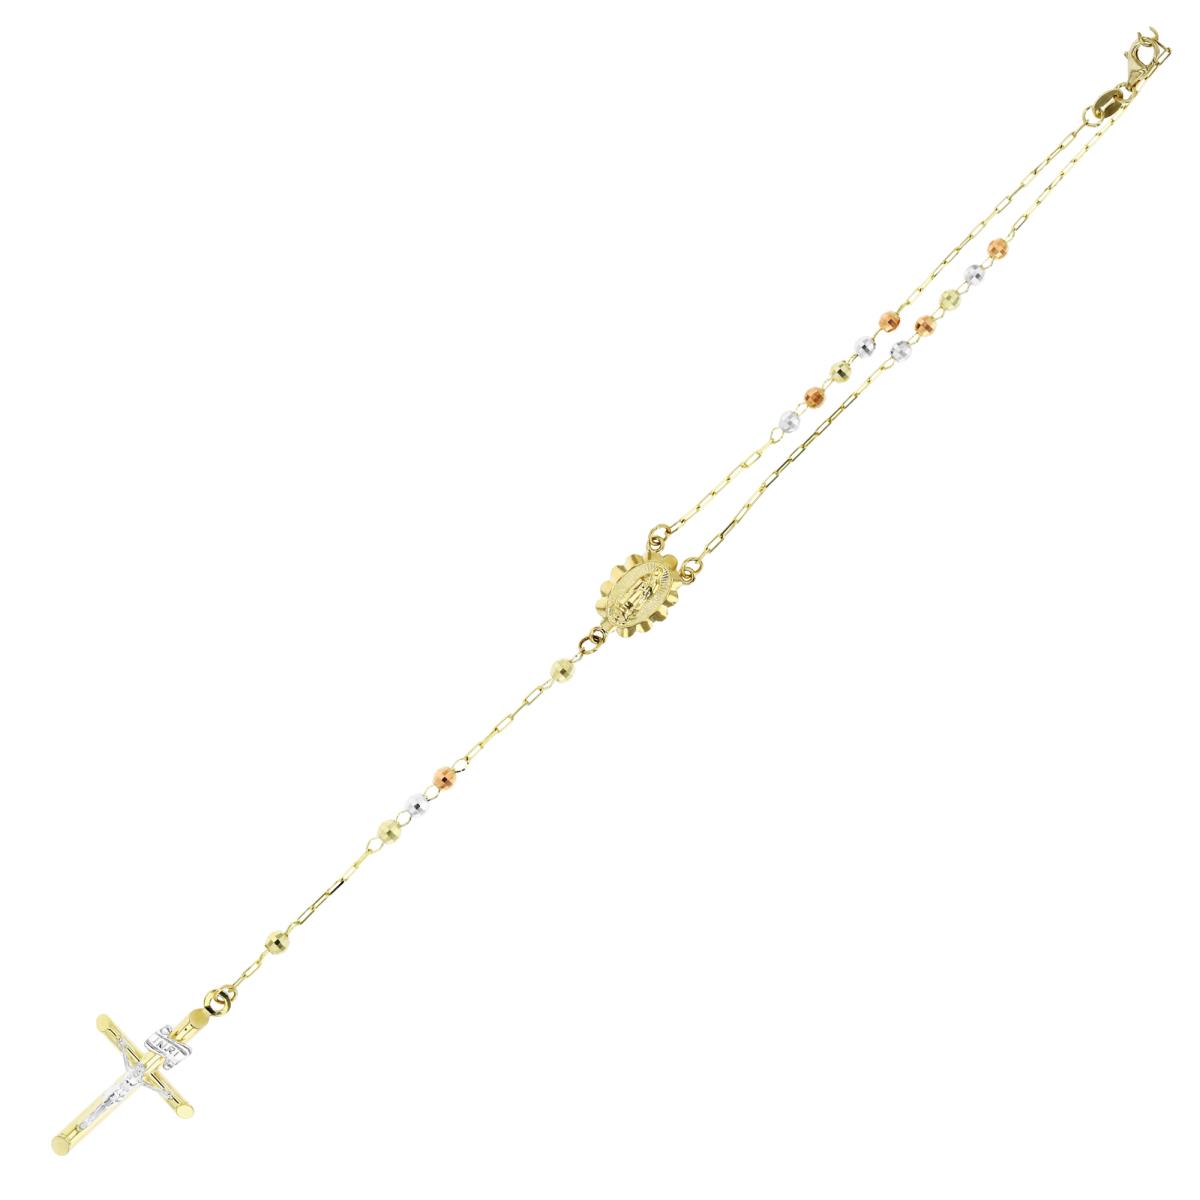 14K Gold Tricolor 3MM Diamond Cut Beads Rosary 24" Necklace